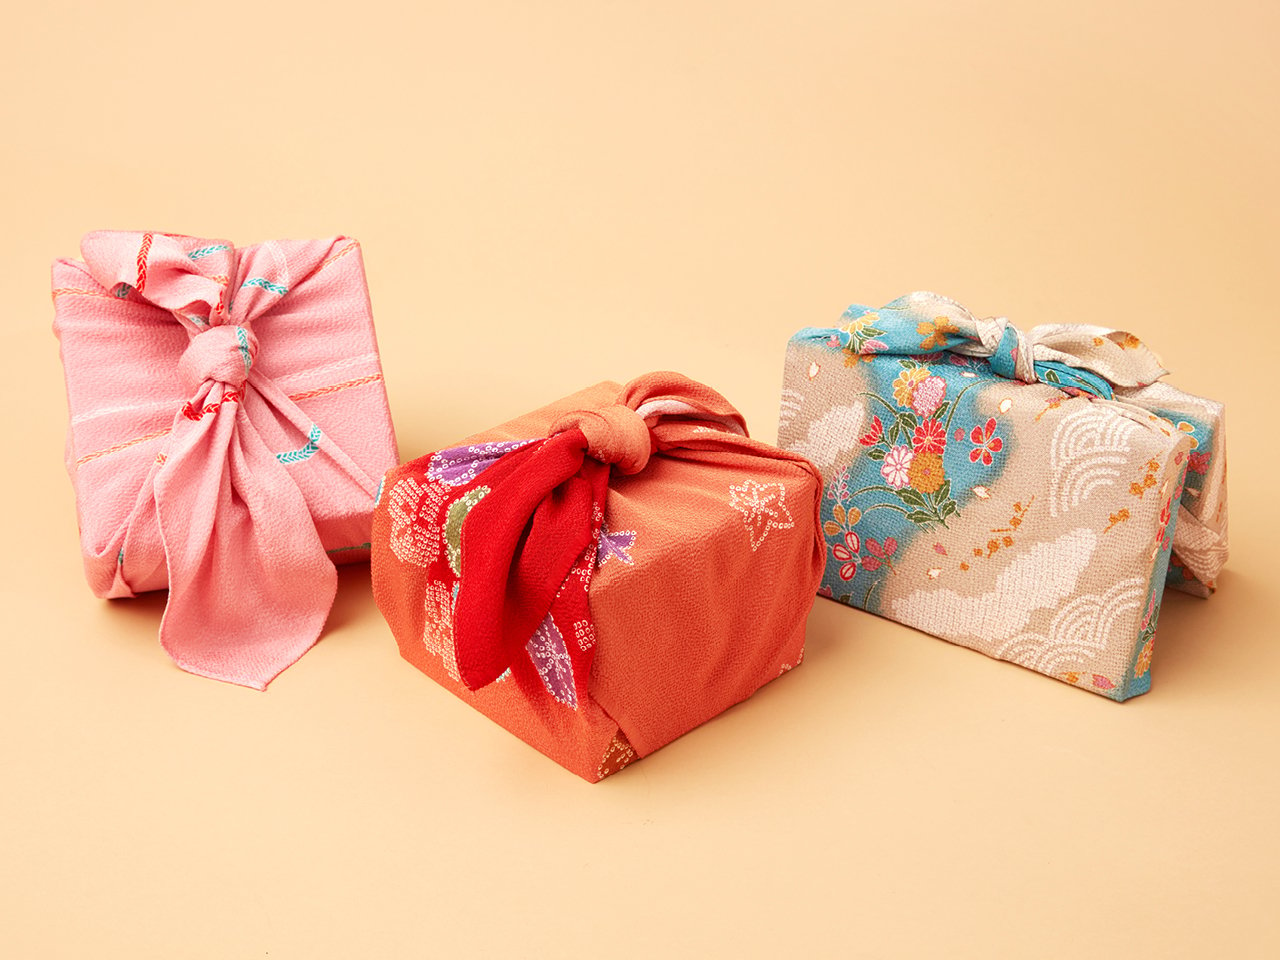 Three rectangular shaped gifts wrapped in cloth